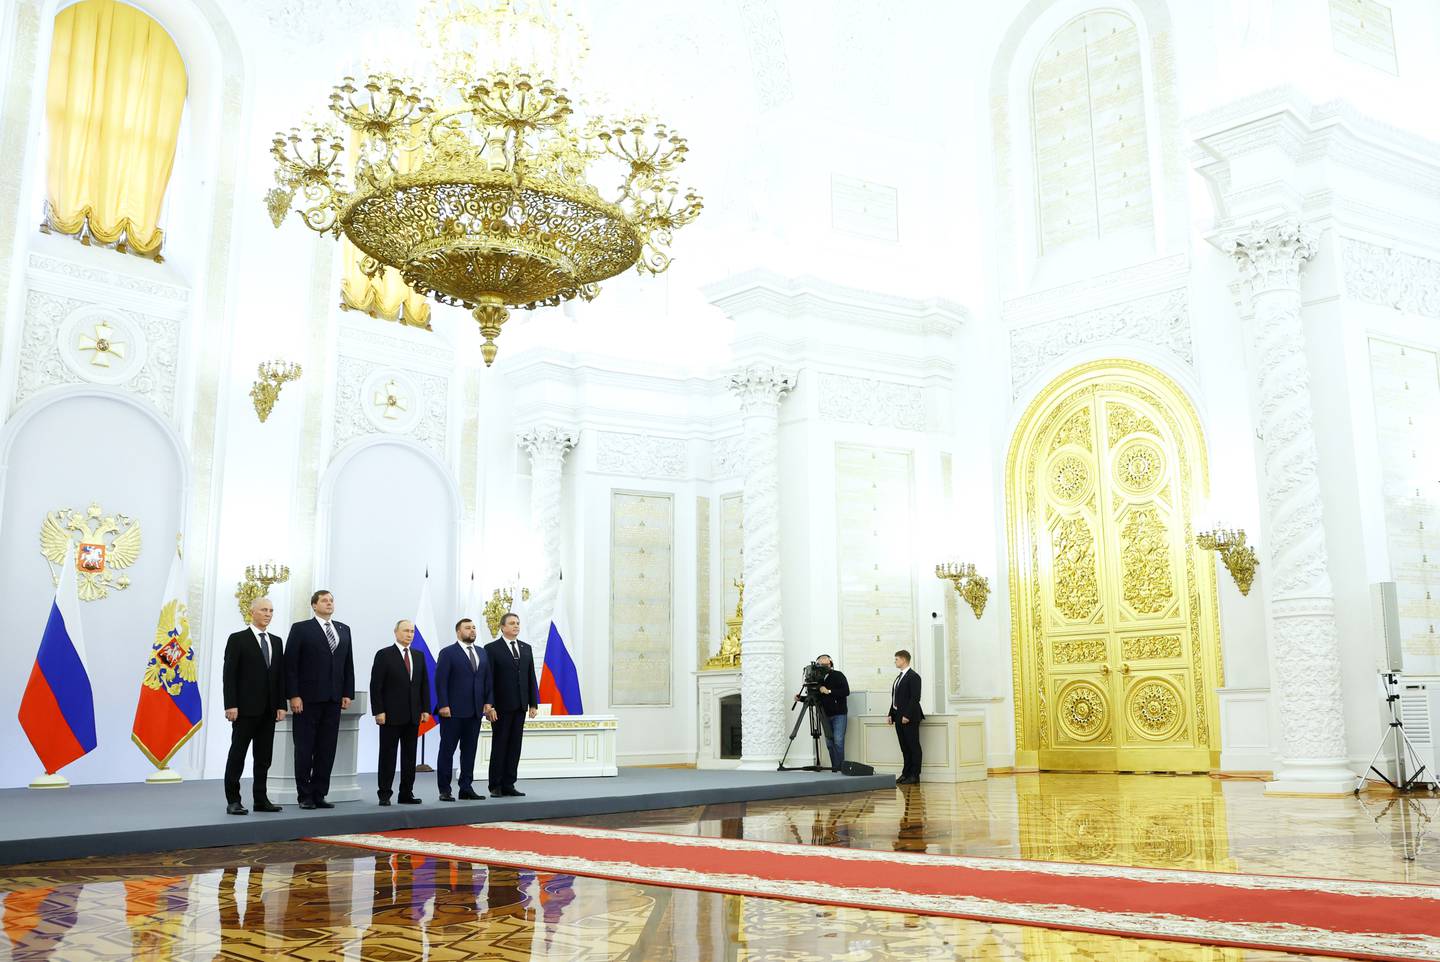 Russia's President Vladimir Putin gave a speech in an opulent Kremlin hall before signing the acts of accession. EPA 